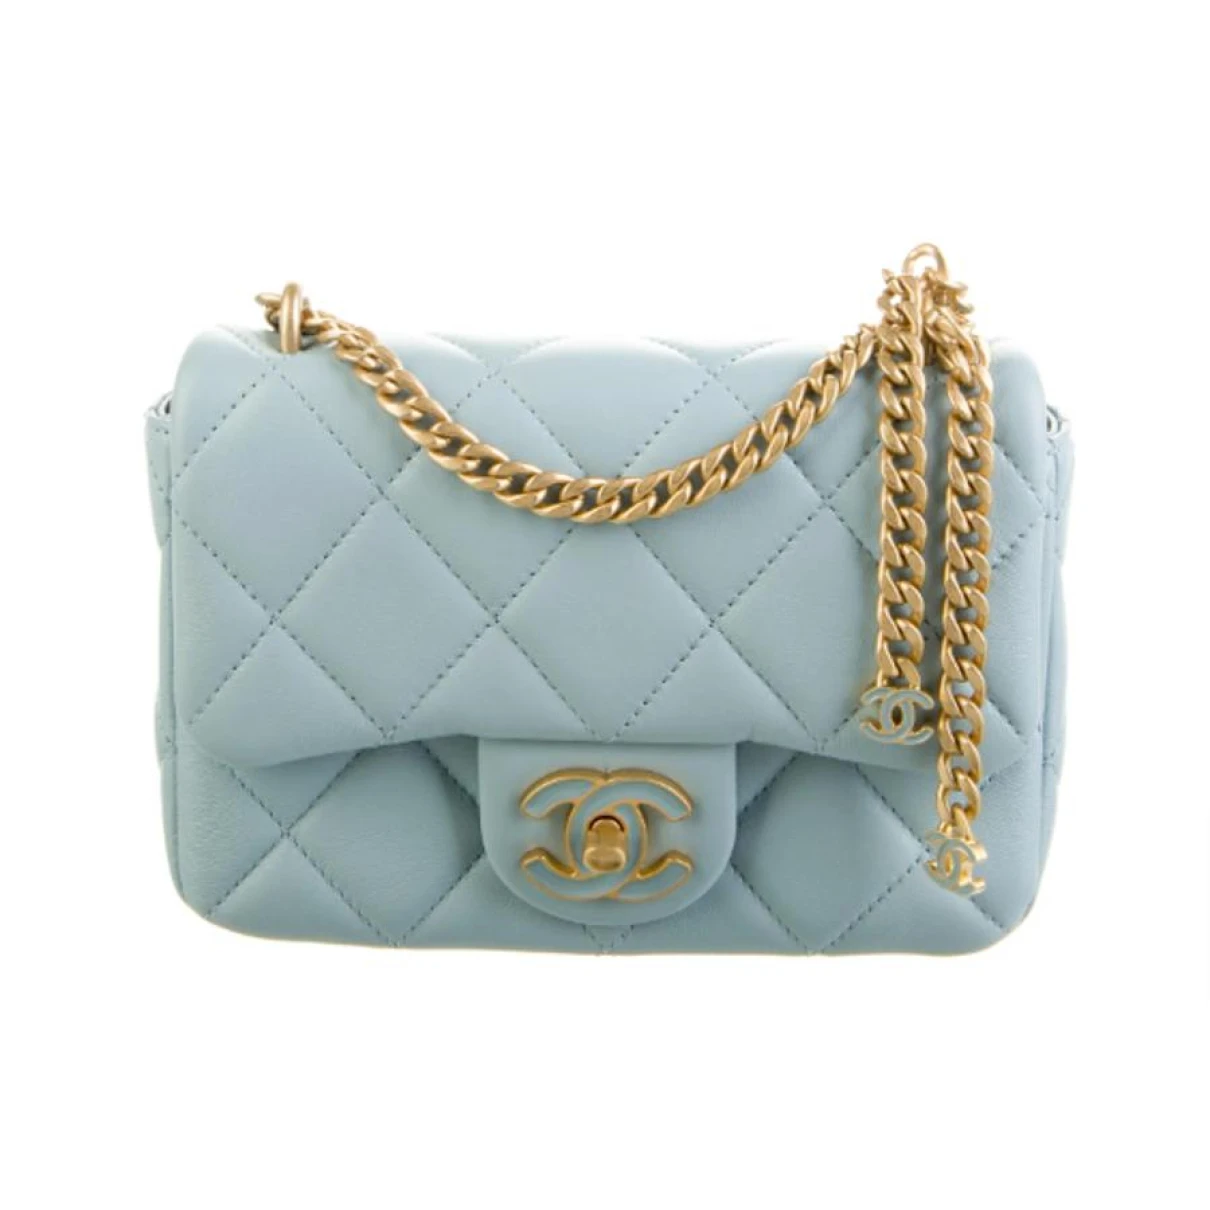 Pre-owned Chanel Leather Handbag In Blue